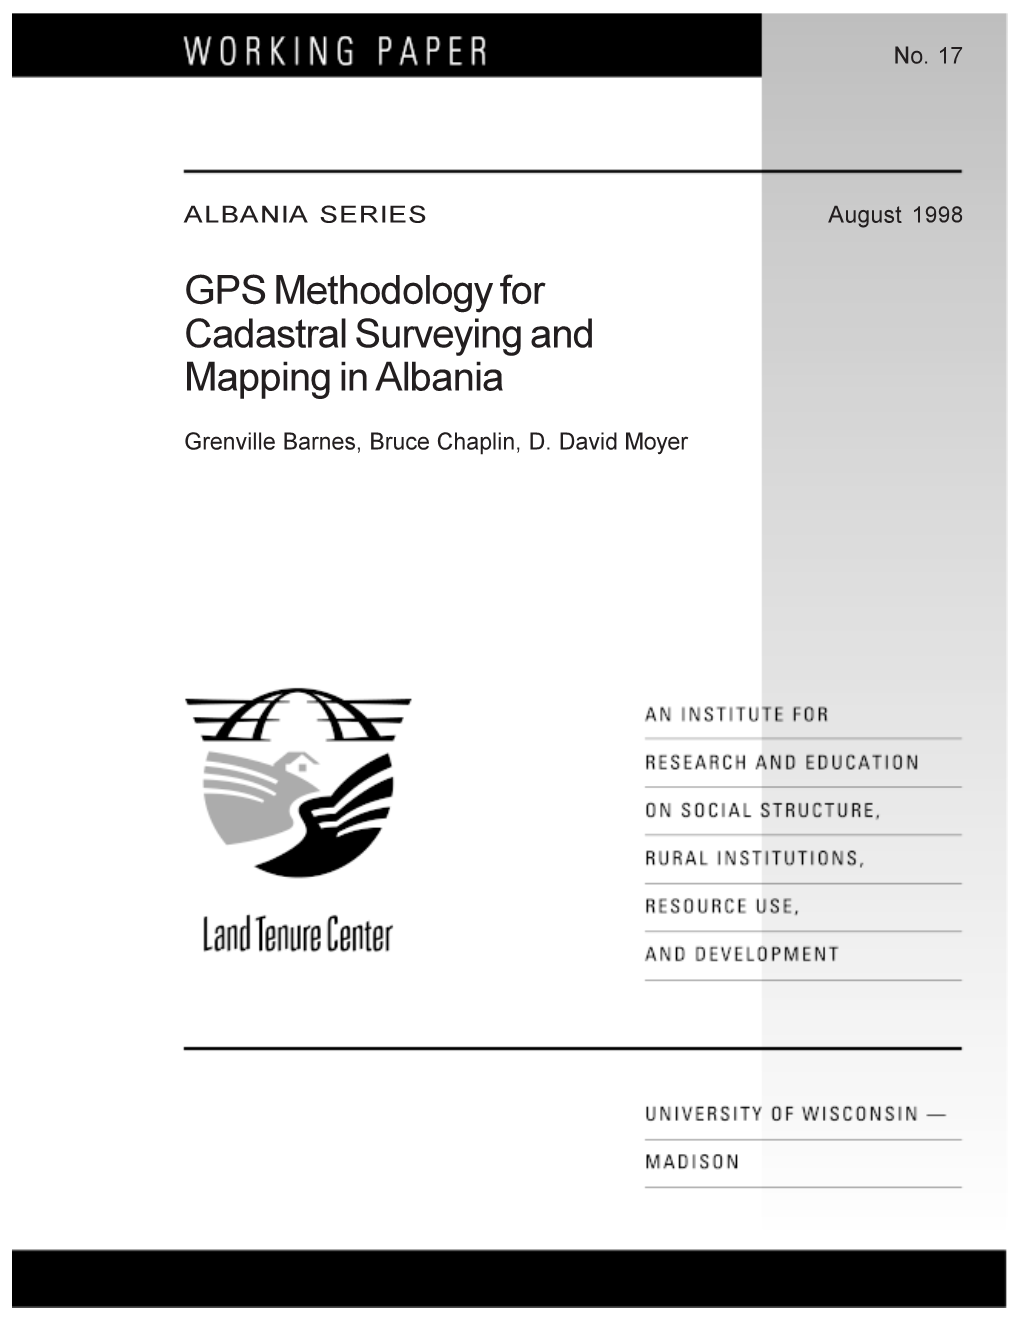 GPS Methodology for Cadastral Surveying and Mapping in Albania